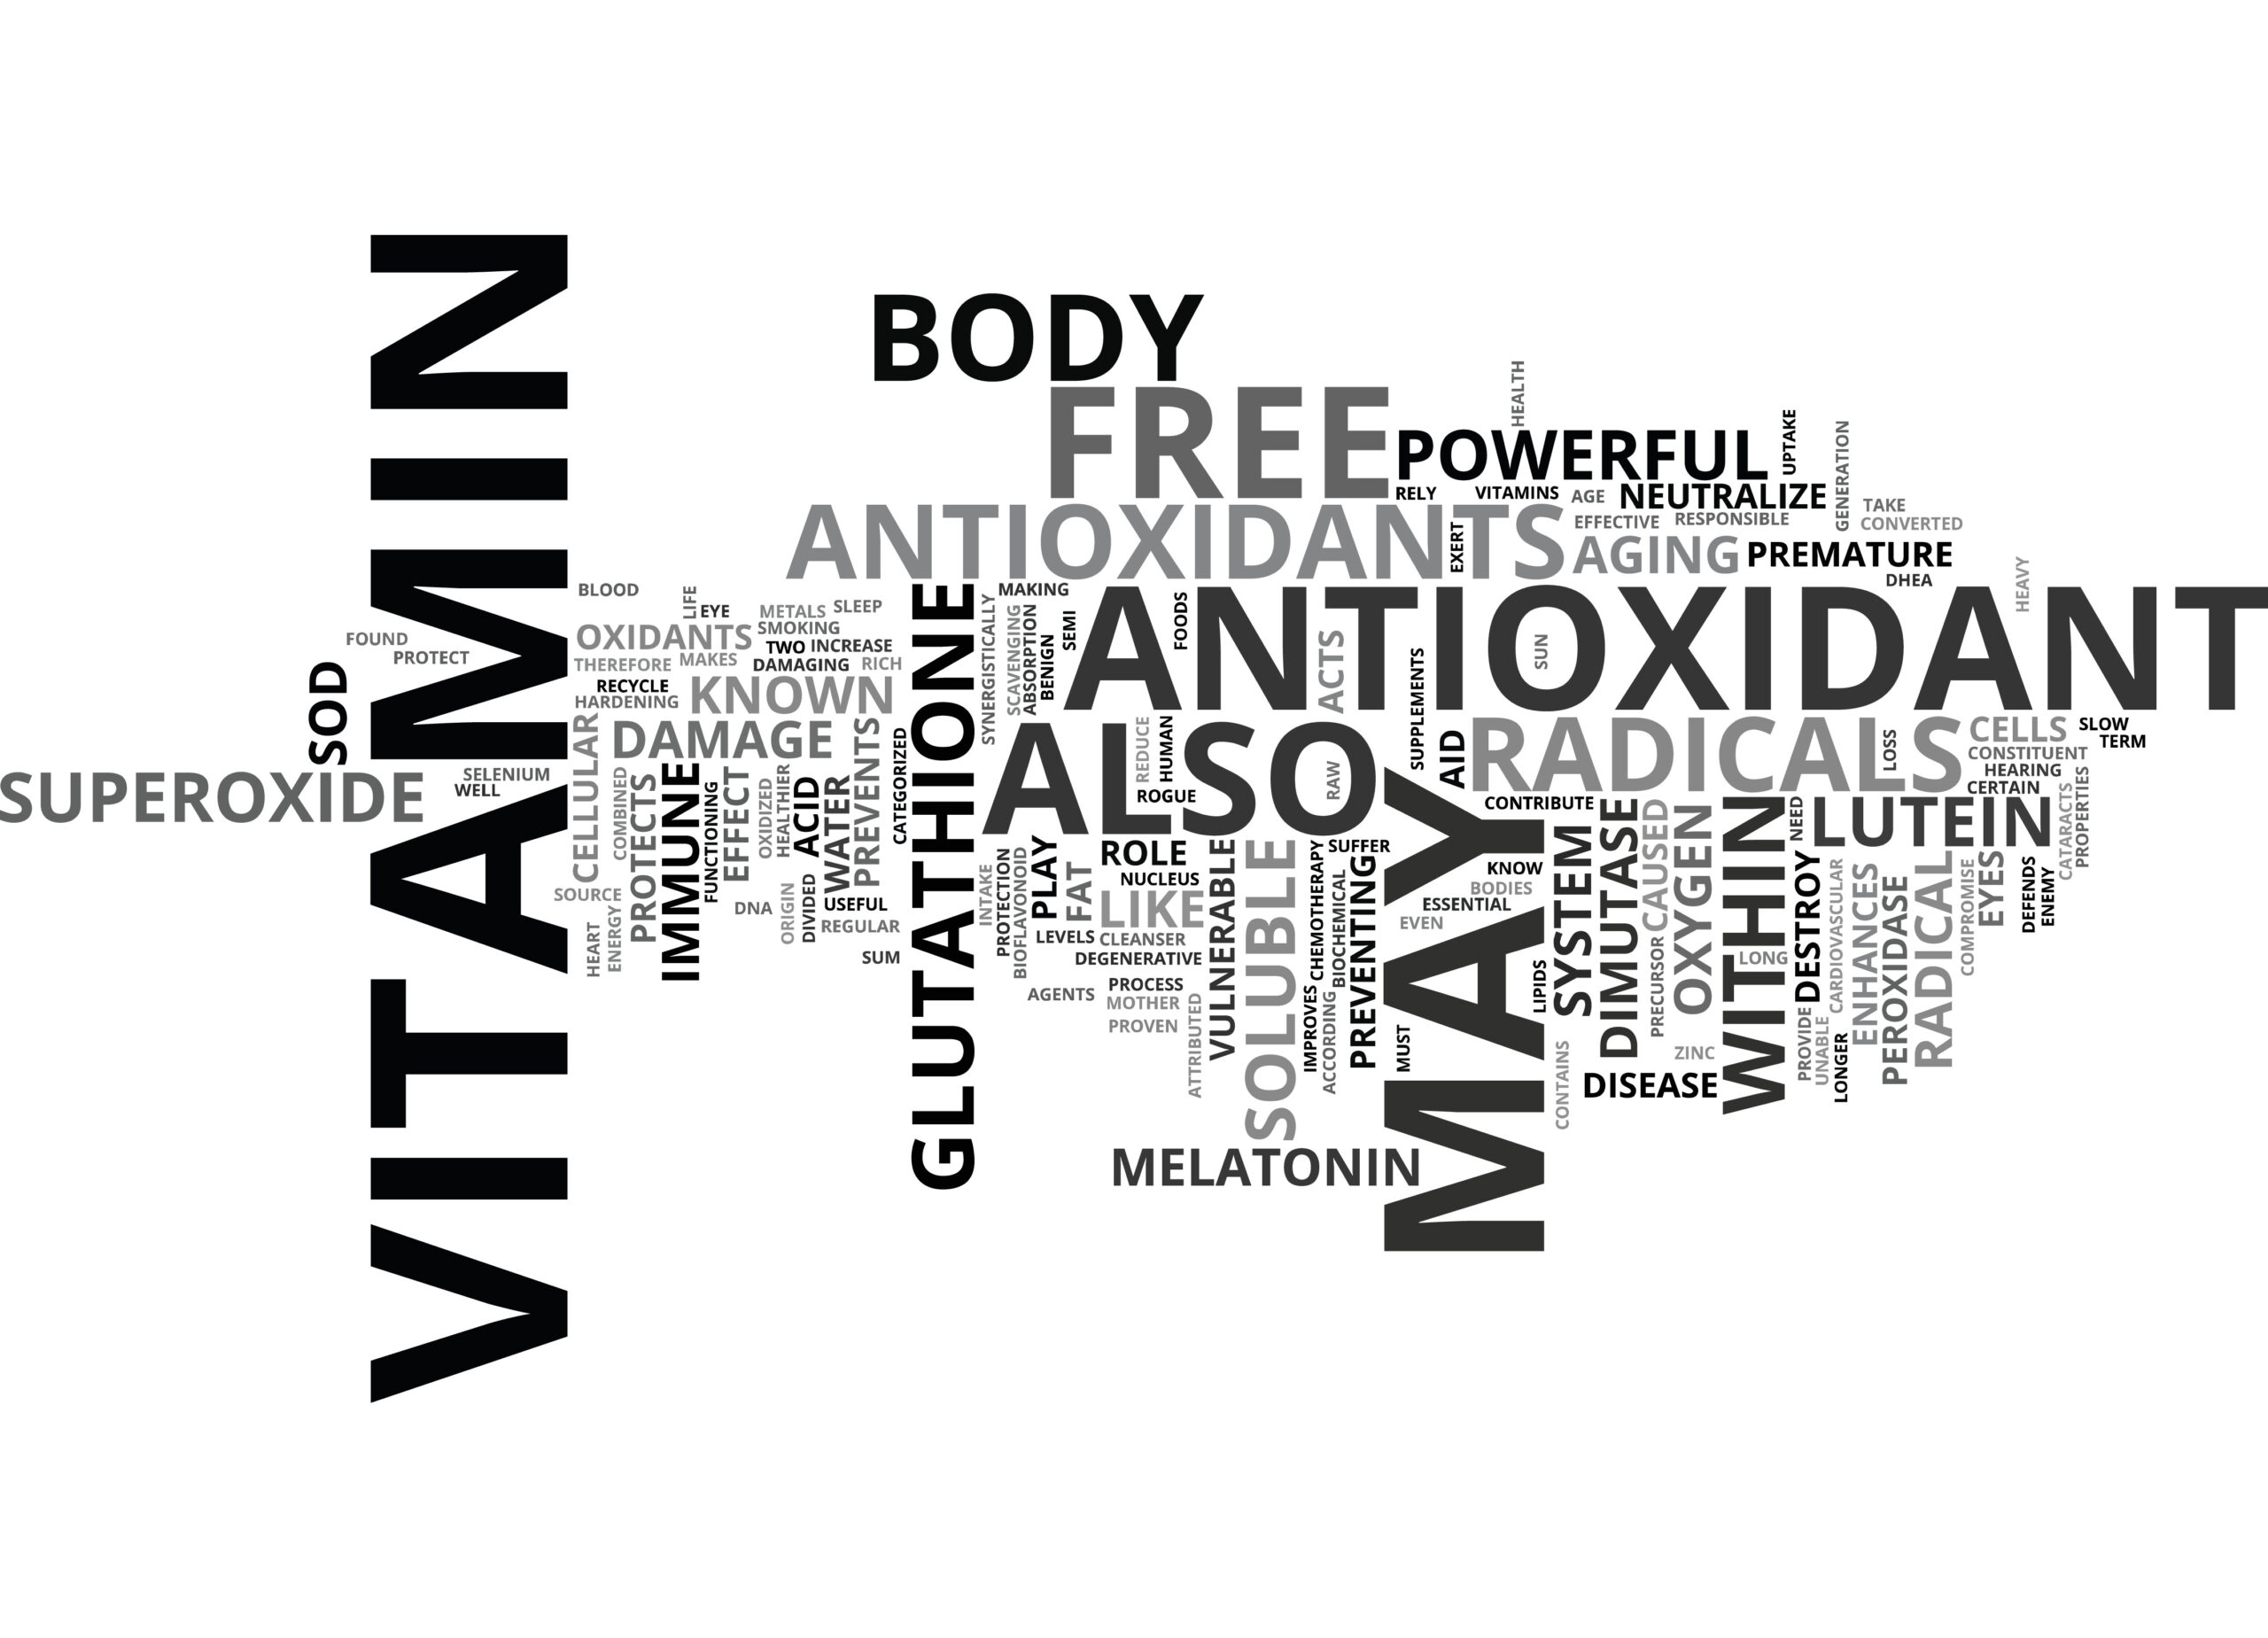 Thumbnail image for the blog post: What is Glutathione?